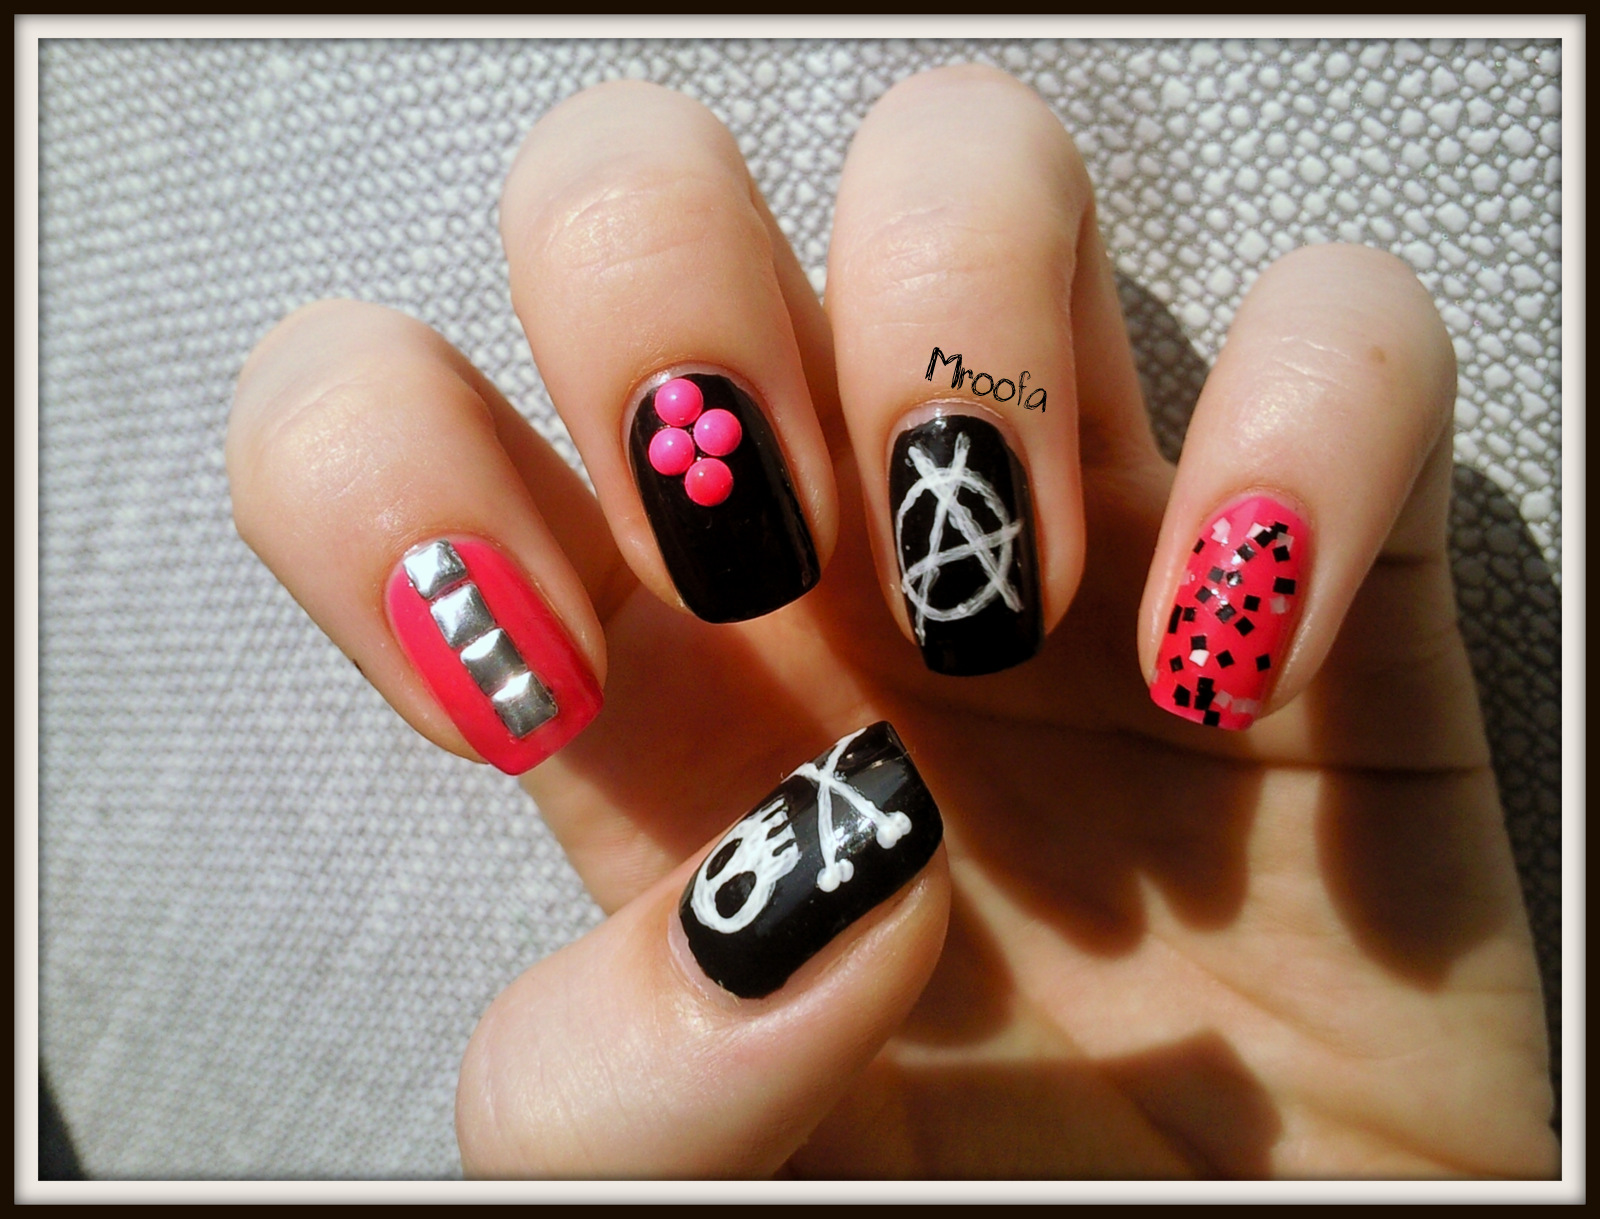 1. "Studded Punk Rock Nails" - wide 7